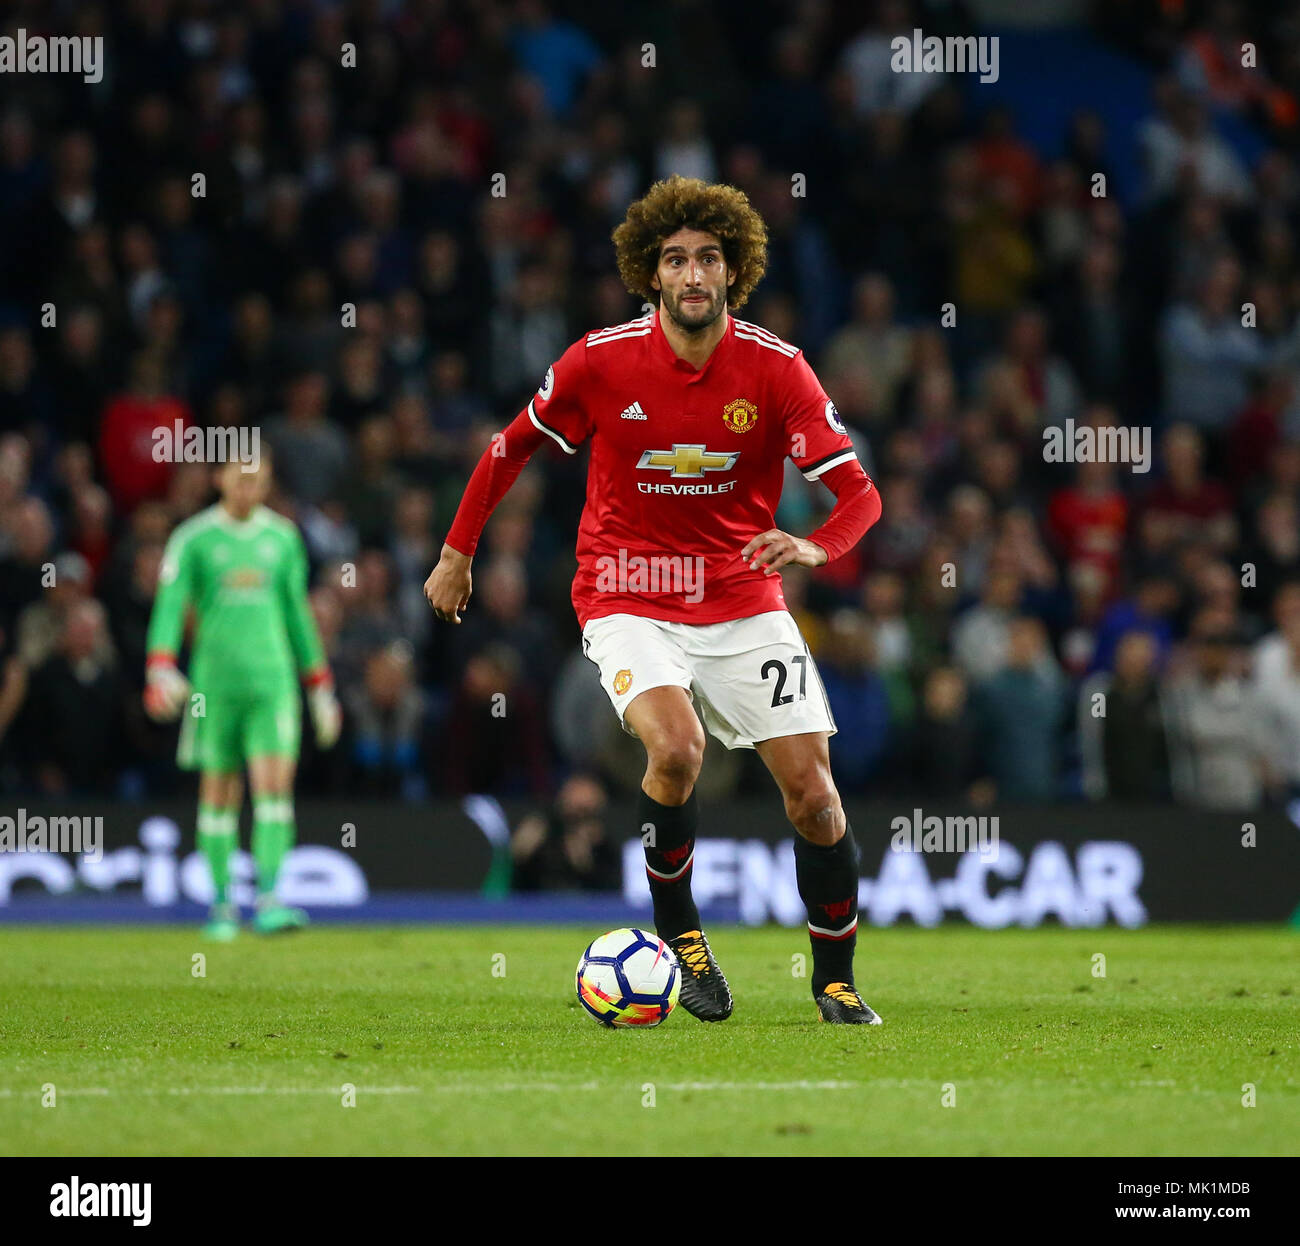 Marouane Fellaini of Manchester United during the Premier League match between Brighton and Hove Albion and Manchester United at the American Express Community Stadium in Brighton and Hove. 04 May 2018 *** EDITORIAL USE ONLY ***  No merchandising. For Football images FA and Premier League restrictions apply inc. no internet/mobile usage without FAPL license - for details contact Football Dataco Stock Photo